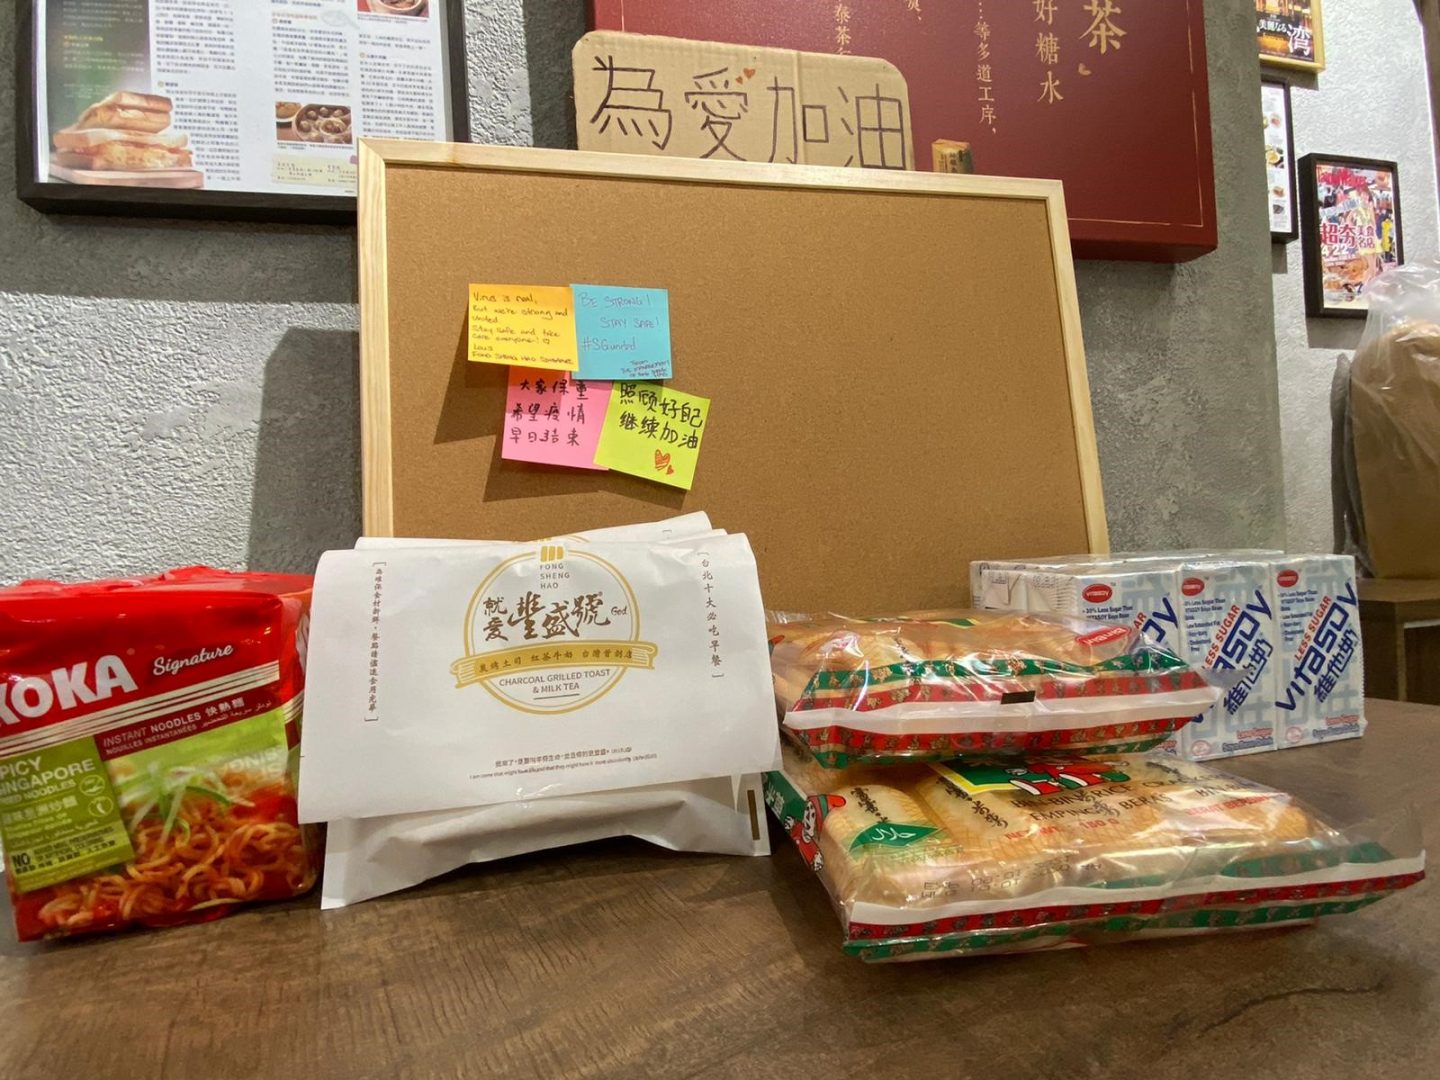 The food corner Tan set up during the Circuit Breaker became a heart-warming community project. Apart from the bread from Fong Sheng Hao that was left for passers-by, people would contribute encouraging notes as well as food from their home.